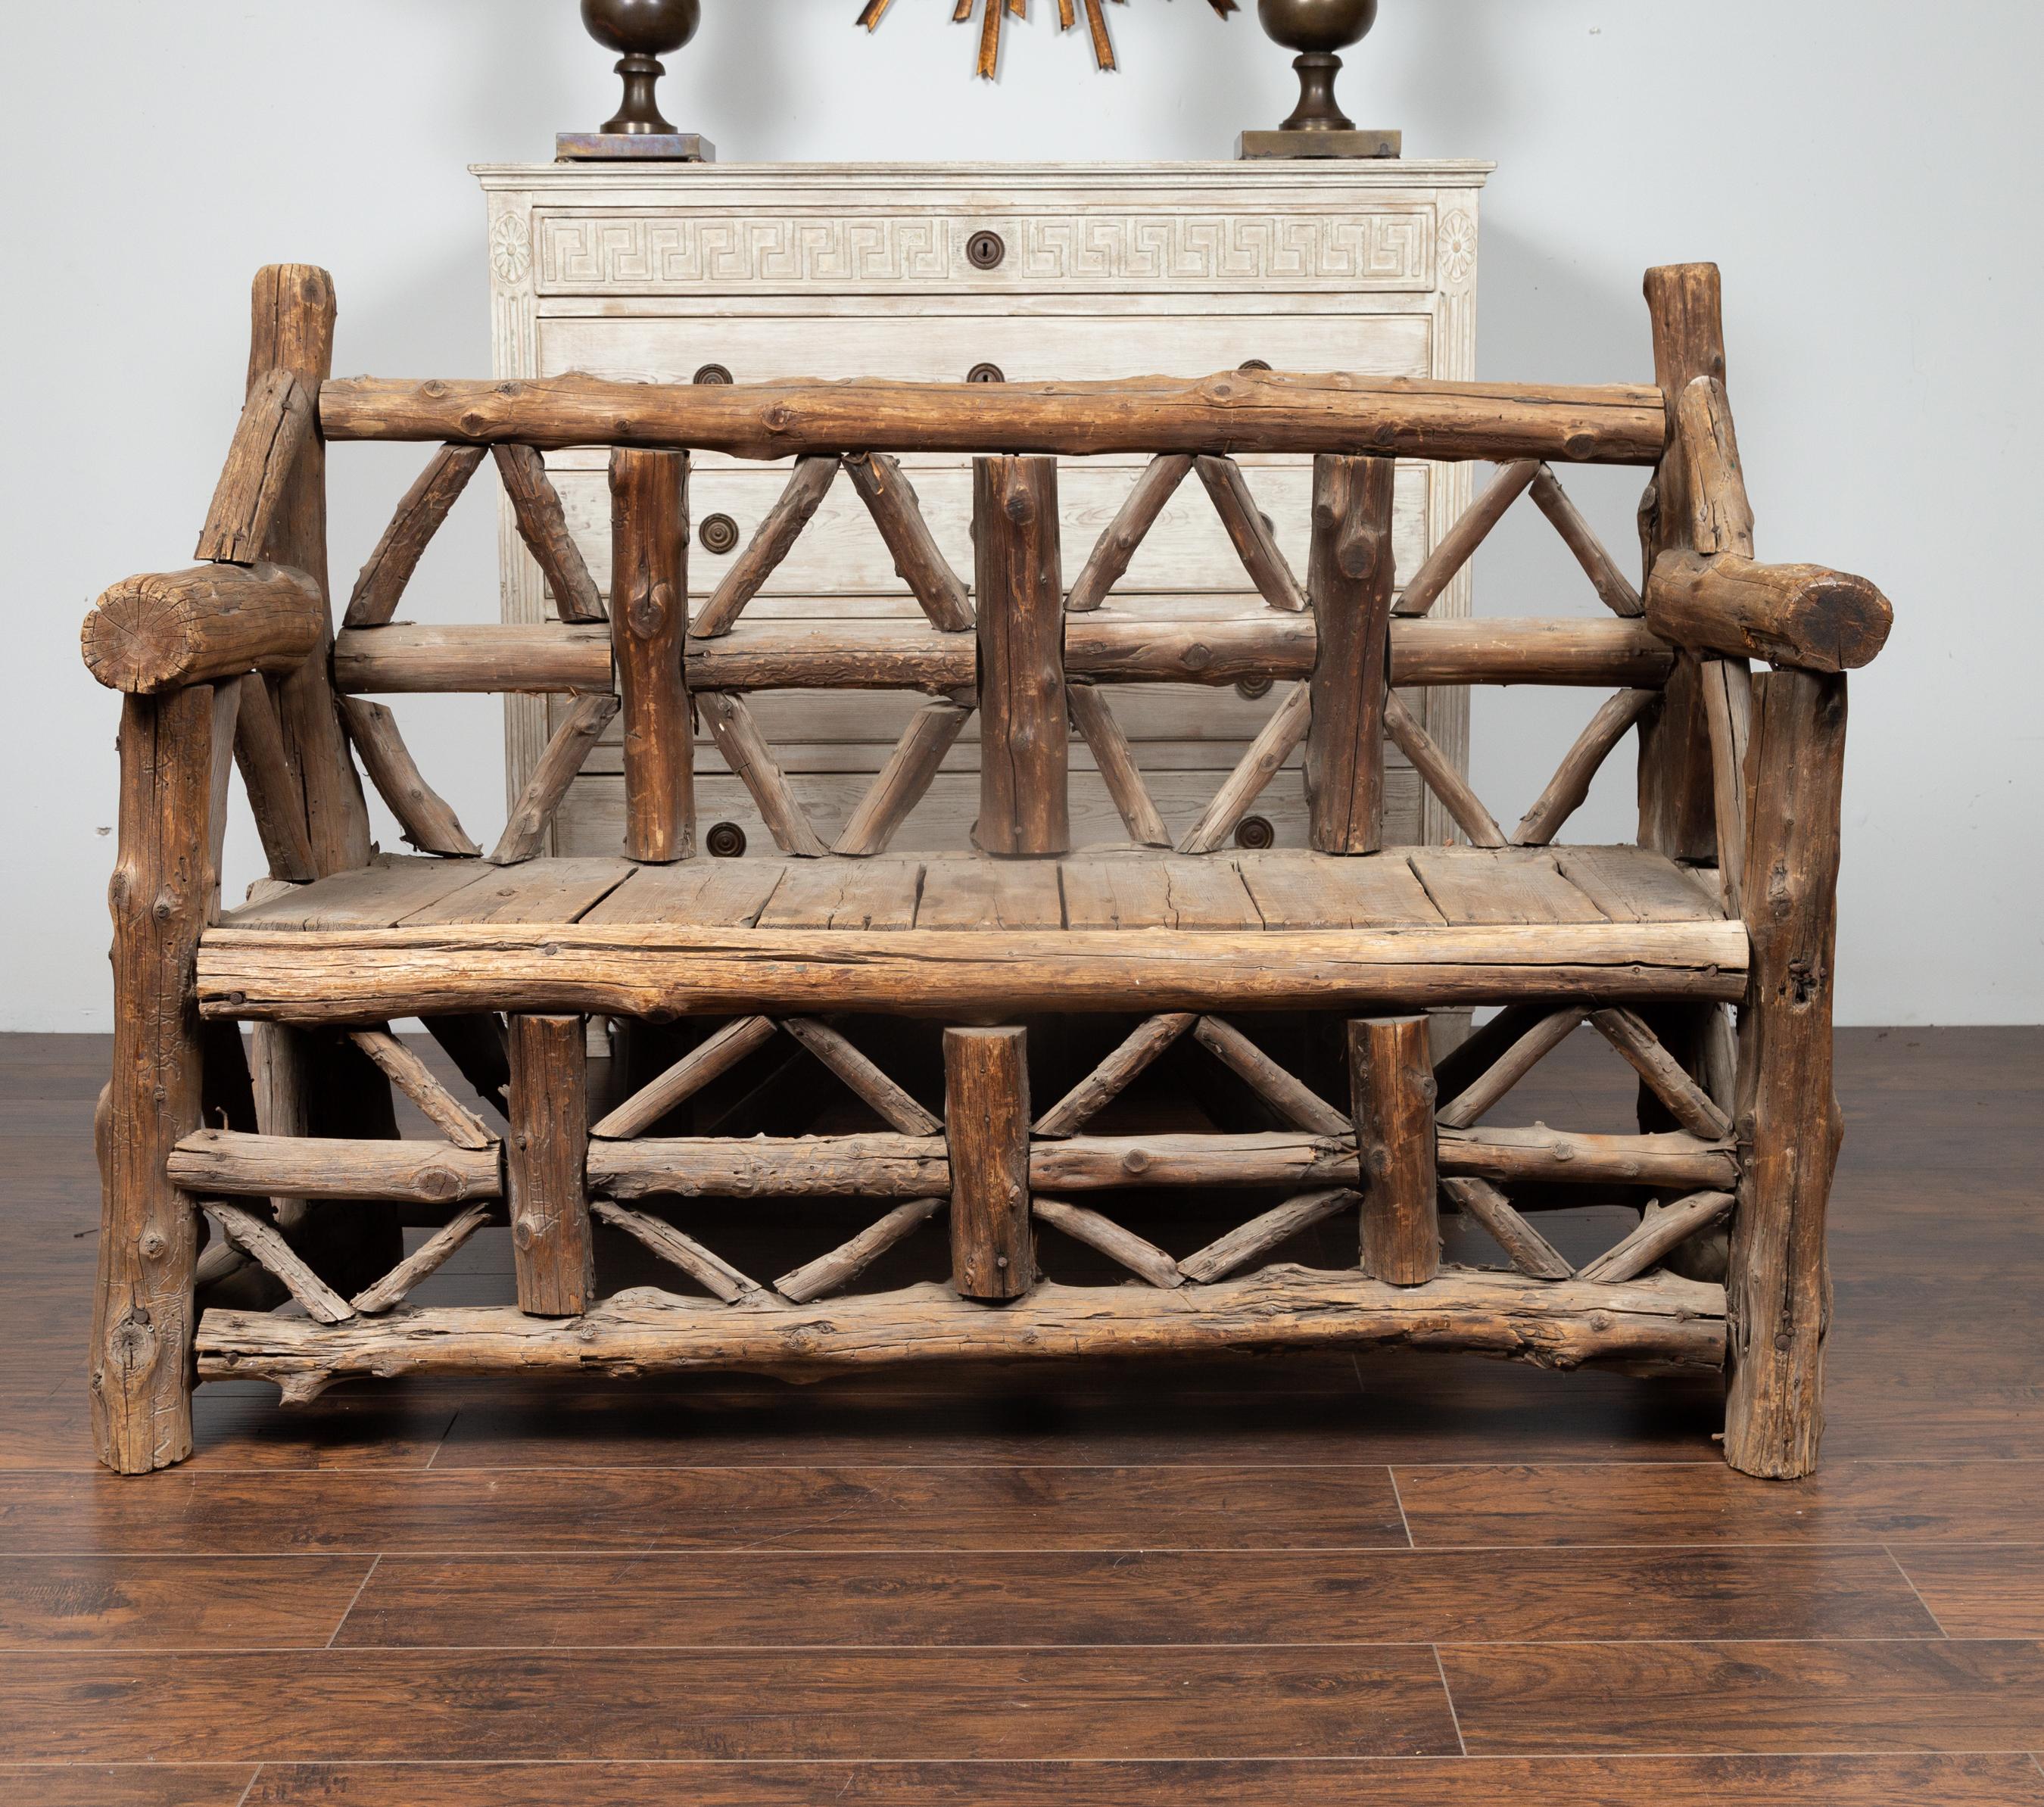 A large American rustic bench from the early 20th century, made of logs. Born during the second quarter of the 20th century, this wooden bench charms us with its rustic appearance and weathered patina. Made of logs arranged in geometric patterns and